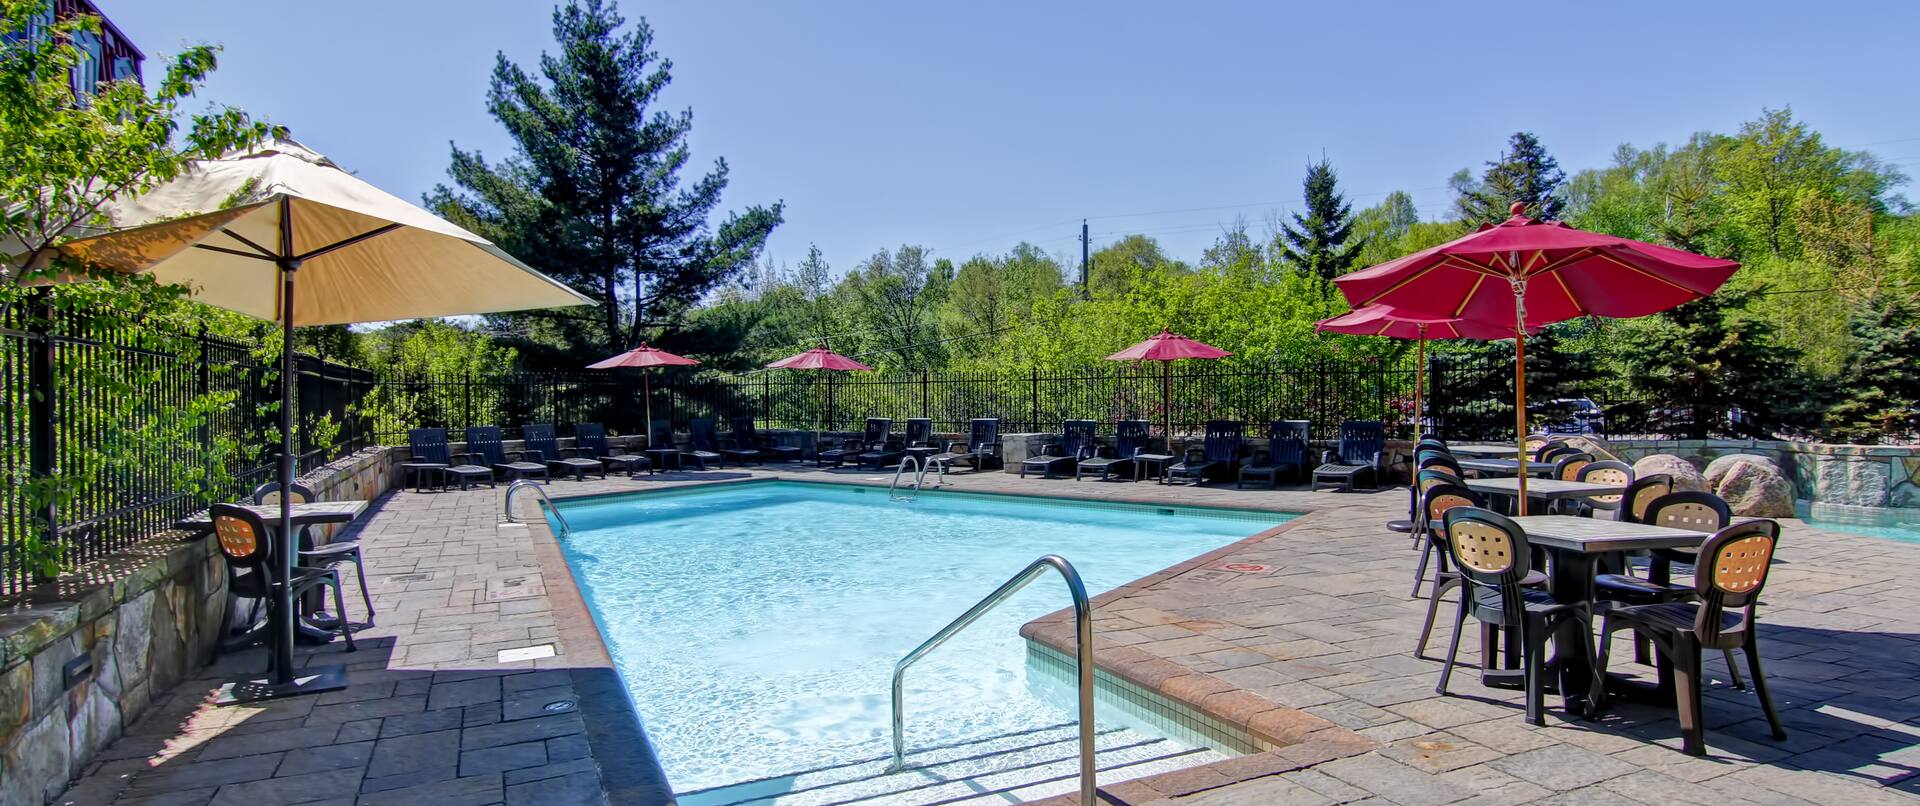 Chairs, Loungers, Tables With Sun Umbrellas by Outdoor Pool Surrounded by Trees